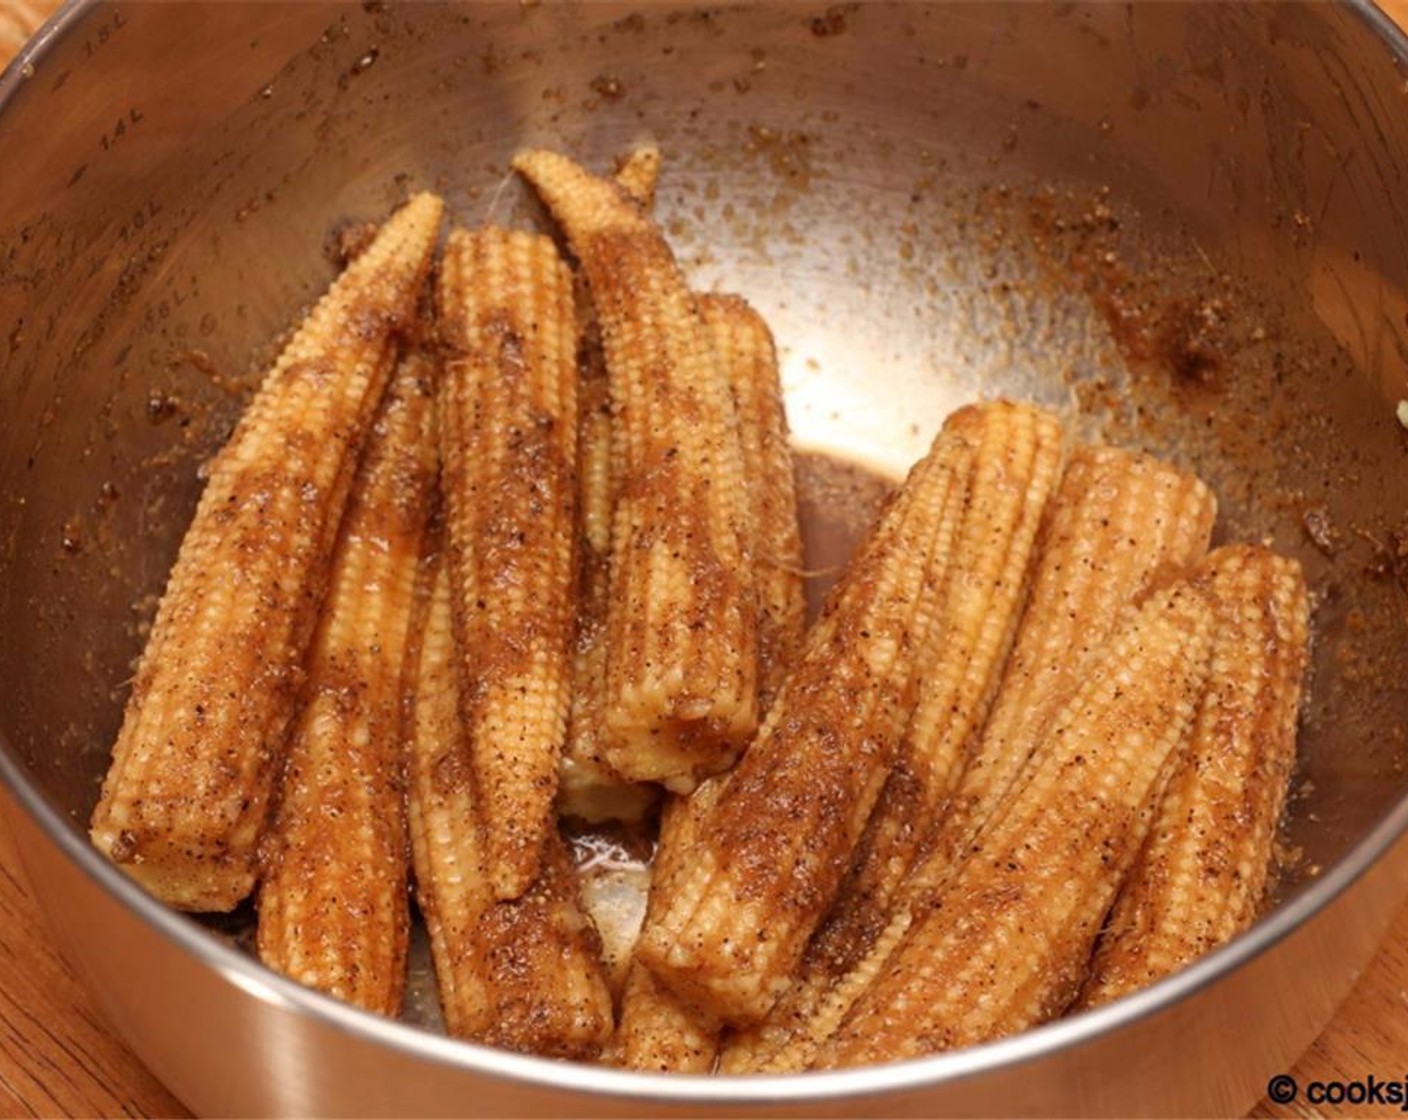 step 2 Use a fourth of the Soy Sauce (1/2 Tbsp), the Ginger Garlic Paste (1/2 Tbsp), Salt (1/2 tsp), Rice Vinegar (to taste) and Ground Black Pepper (1/2 tsp) to marinate the Baby Corn (14 pieces) for 30 minutes.